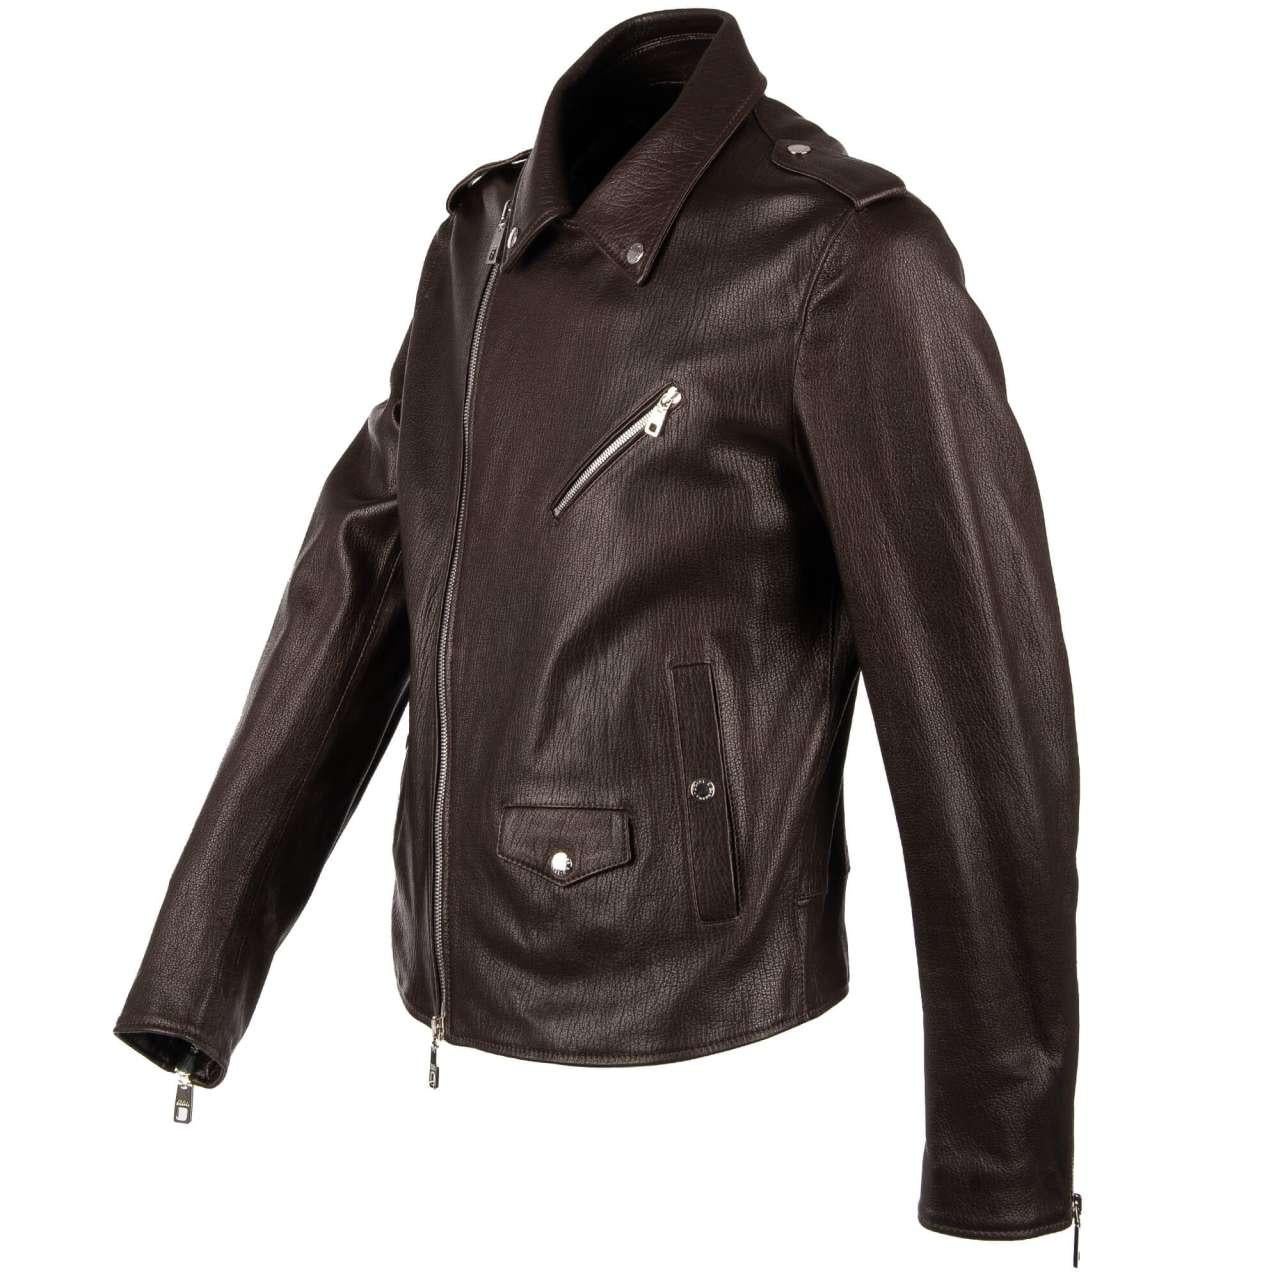 - Biker style nappa lamb leather jacket with many pockets and Logo by DOLCE & GABBANA - New with tag - Former RRP: EUR 2.950 - MADE IN ITALY - Slim Fit - Model: G9LO6L-HULAZ-M1213 - Material: 100% Lambskin - Lining: 85% Silk, 15% Lambskin - Color: